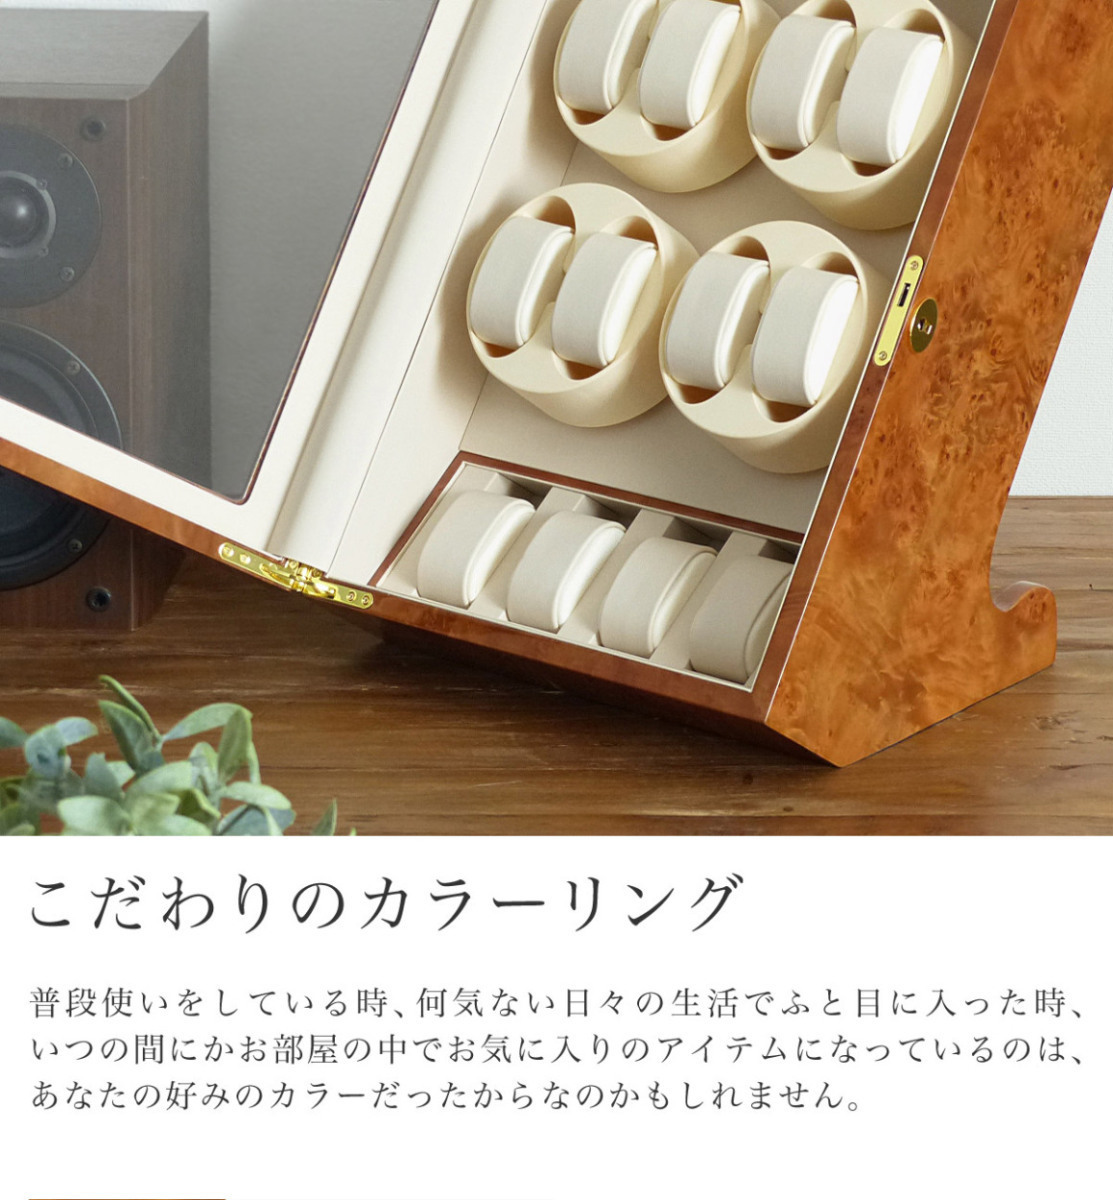 ABIESabies winding machine 8ps.@ volume vertical light brown × ivory 1 year guarantee arm case for clock storage 